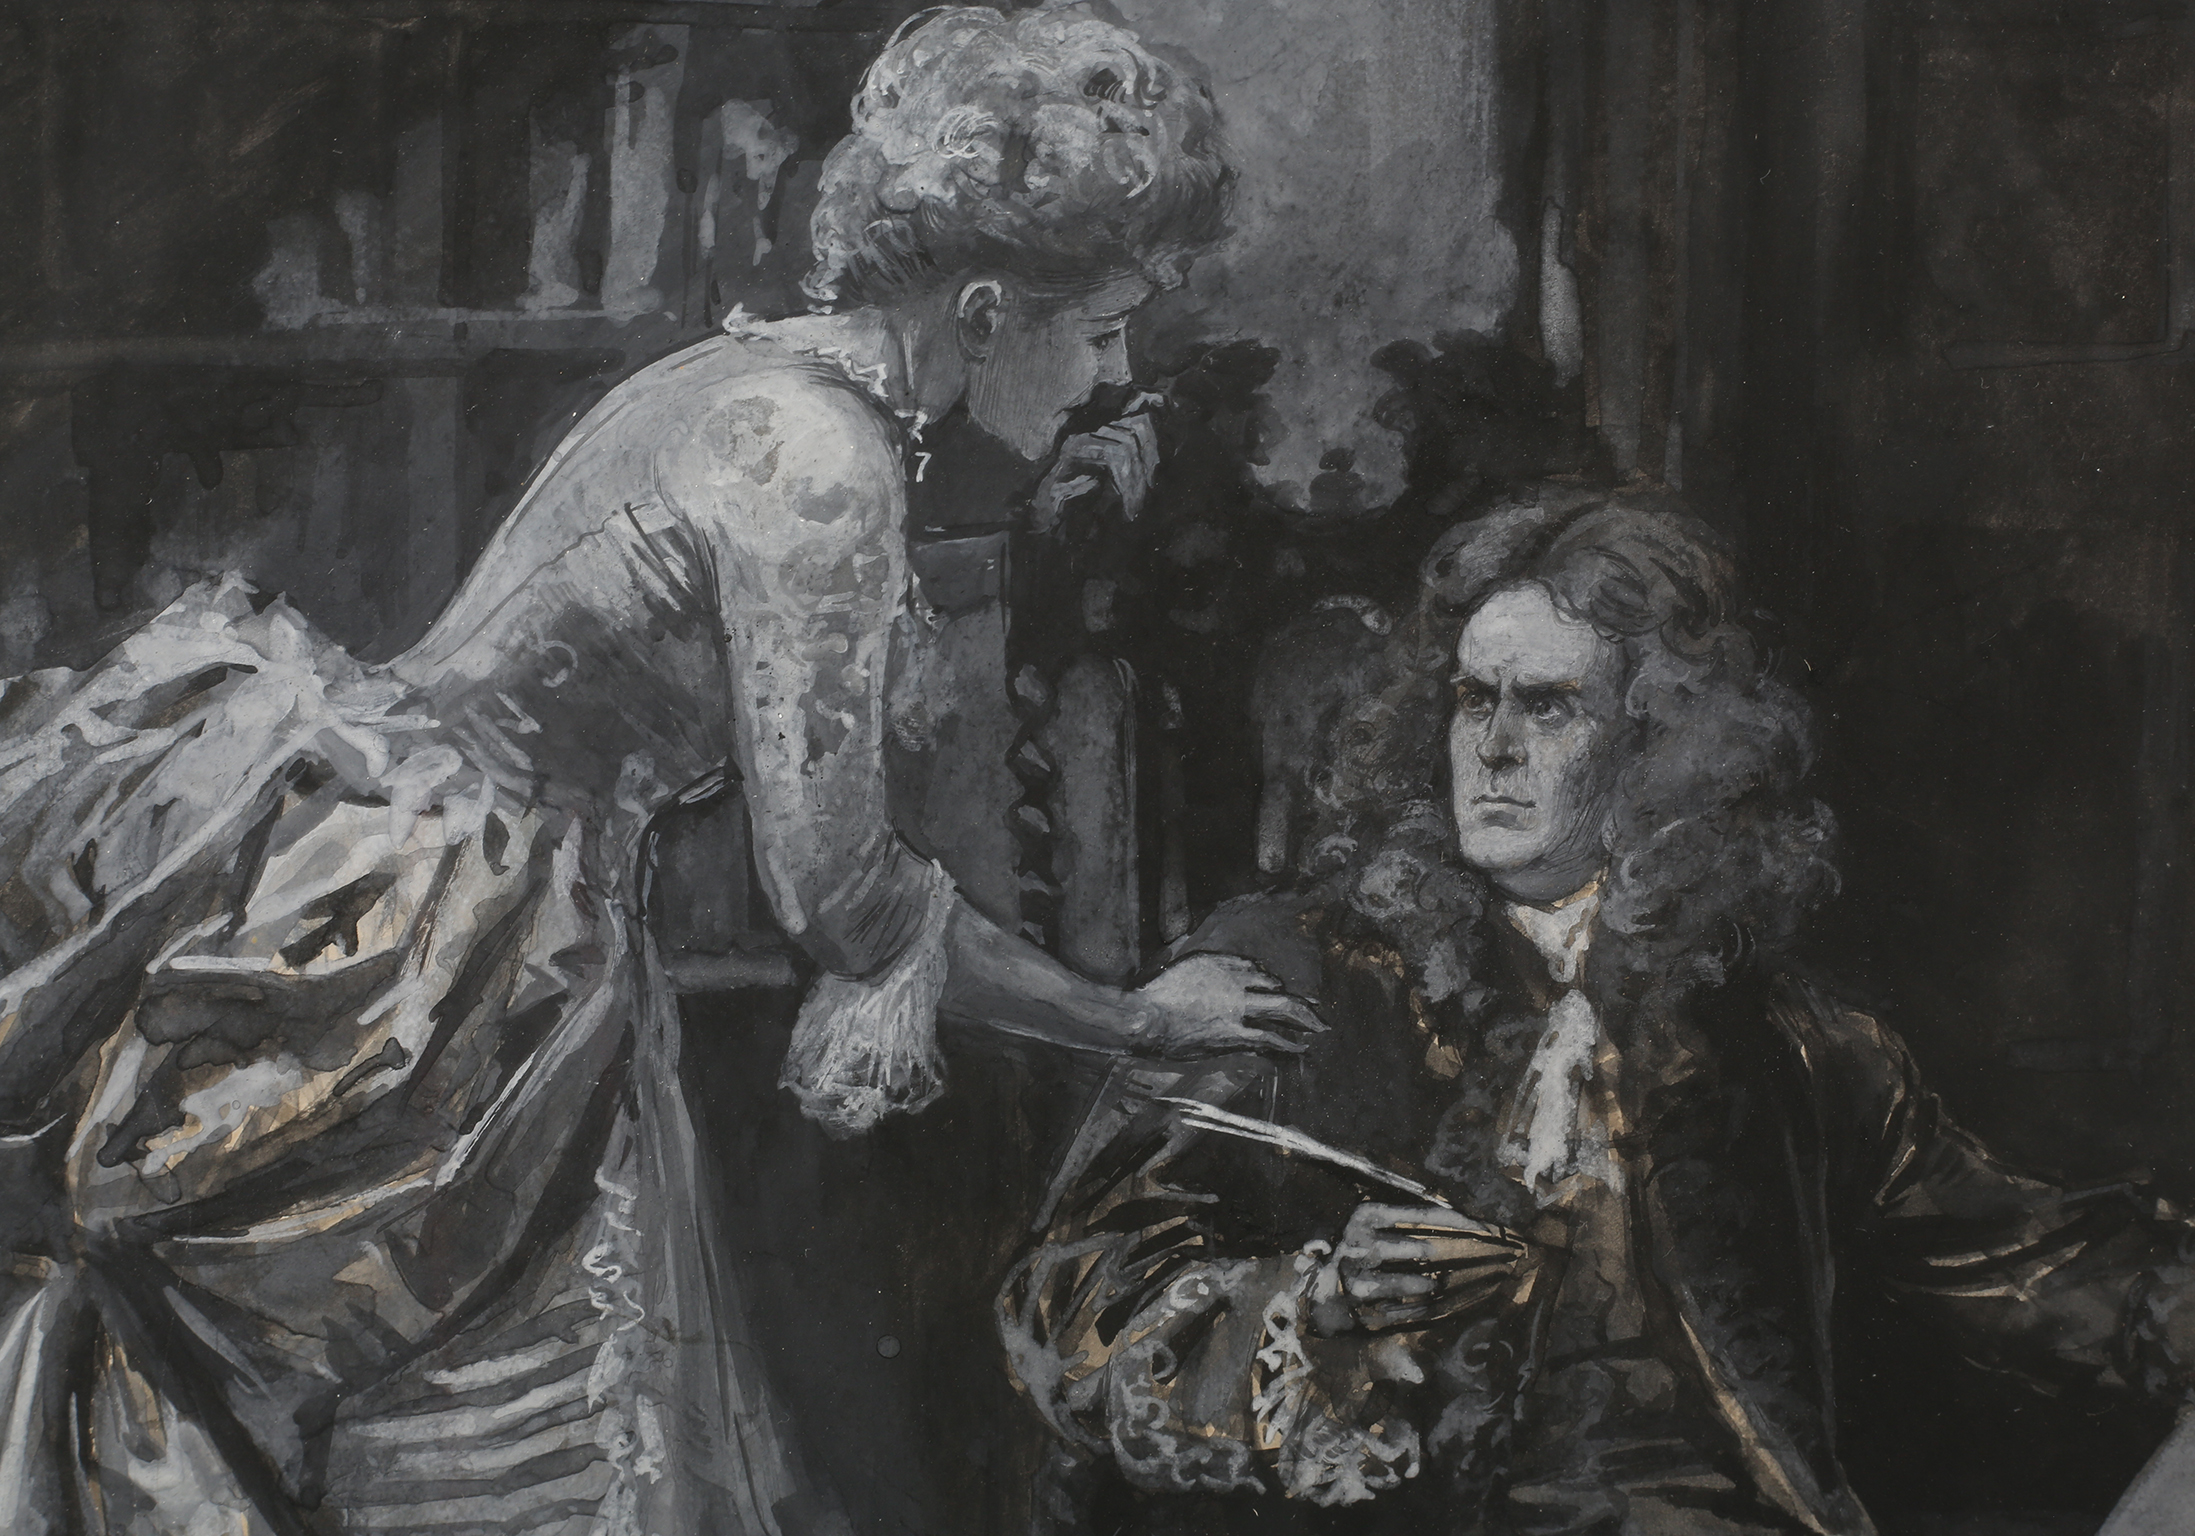 J.BERNARD PARTRIDGE (1861-1945), 'Ravenswood': Ellen Terry as 'Lucy Ashton' with Alfred Bishop as ' - Image 2 of 3